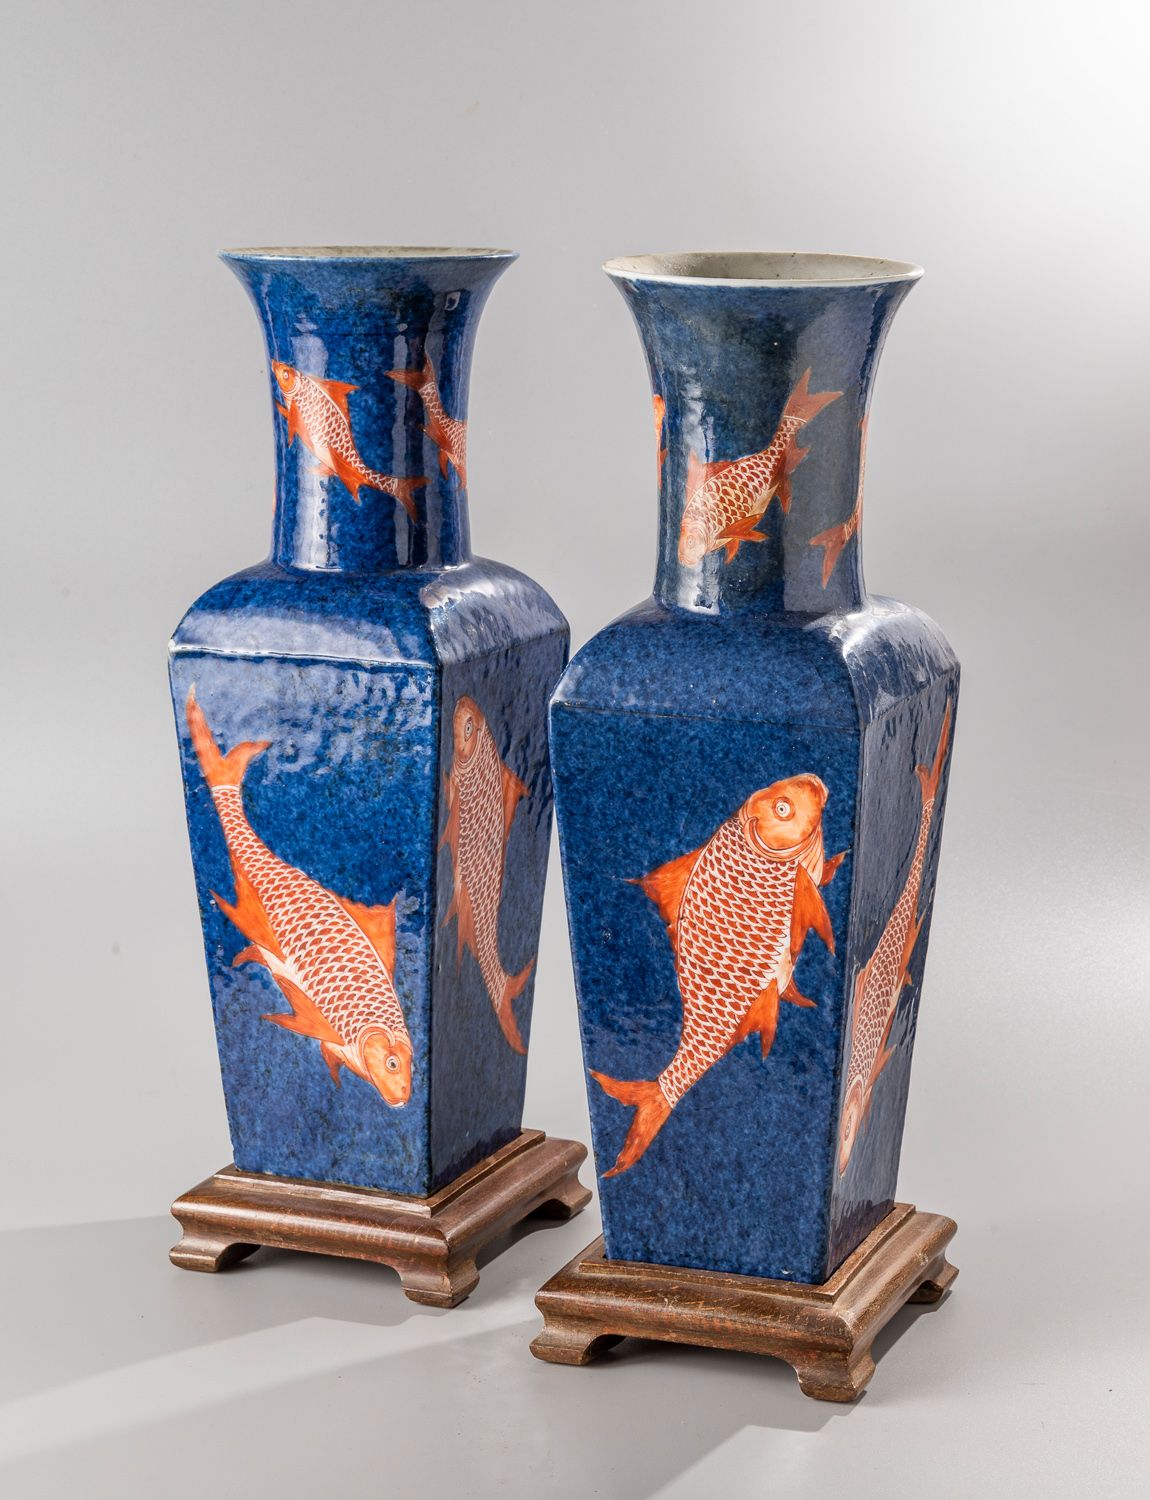 Null CHINA, Kangxi mark and period

A pair of long-necked quadrangular porcelain&hellip;